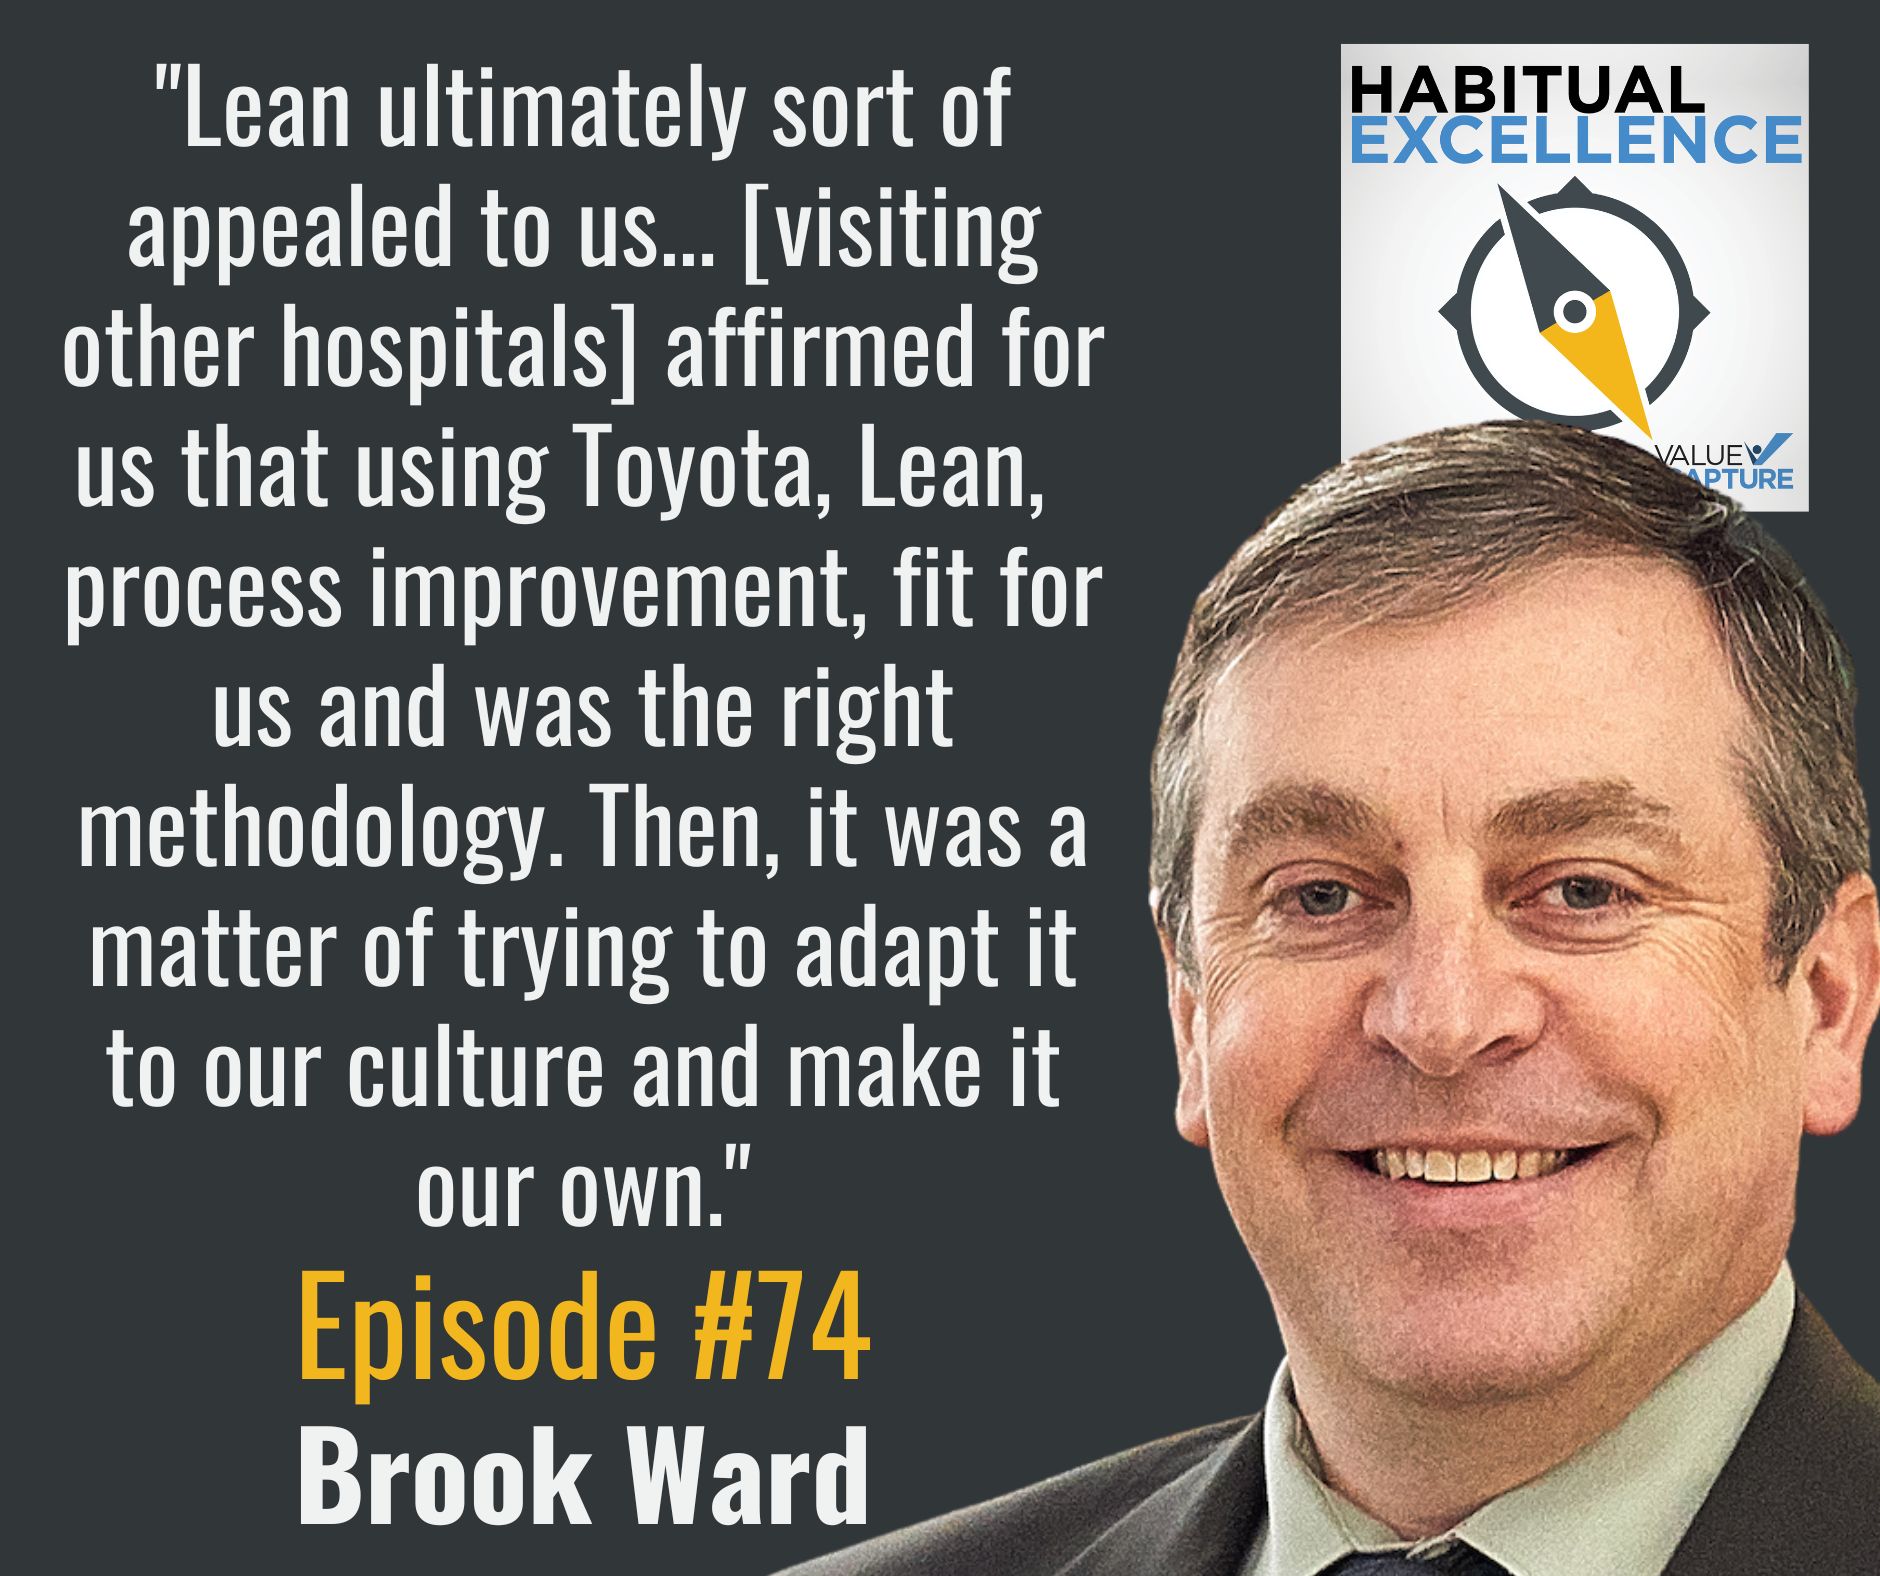 "Lean ultimately sort of appealed to us... [visiting other hospitals] affirmed for us that using Toyota, Lean,  process improvement, fit for us and was the right methodology. Then, it was a matter of trying to adapt it to our culture and make it our own."